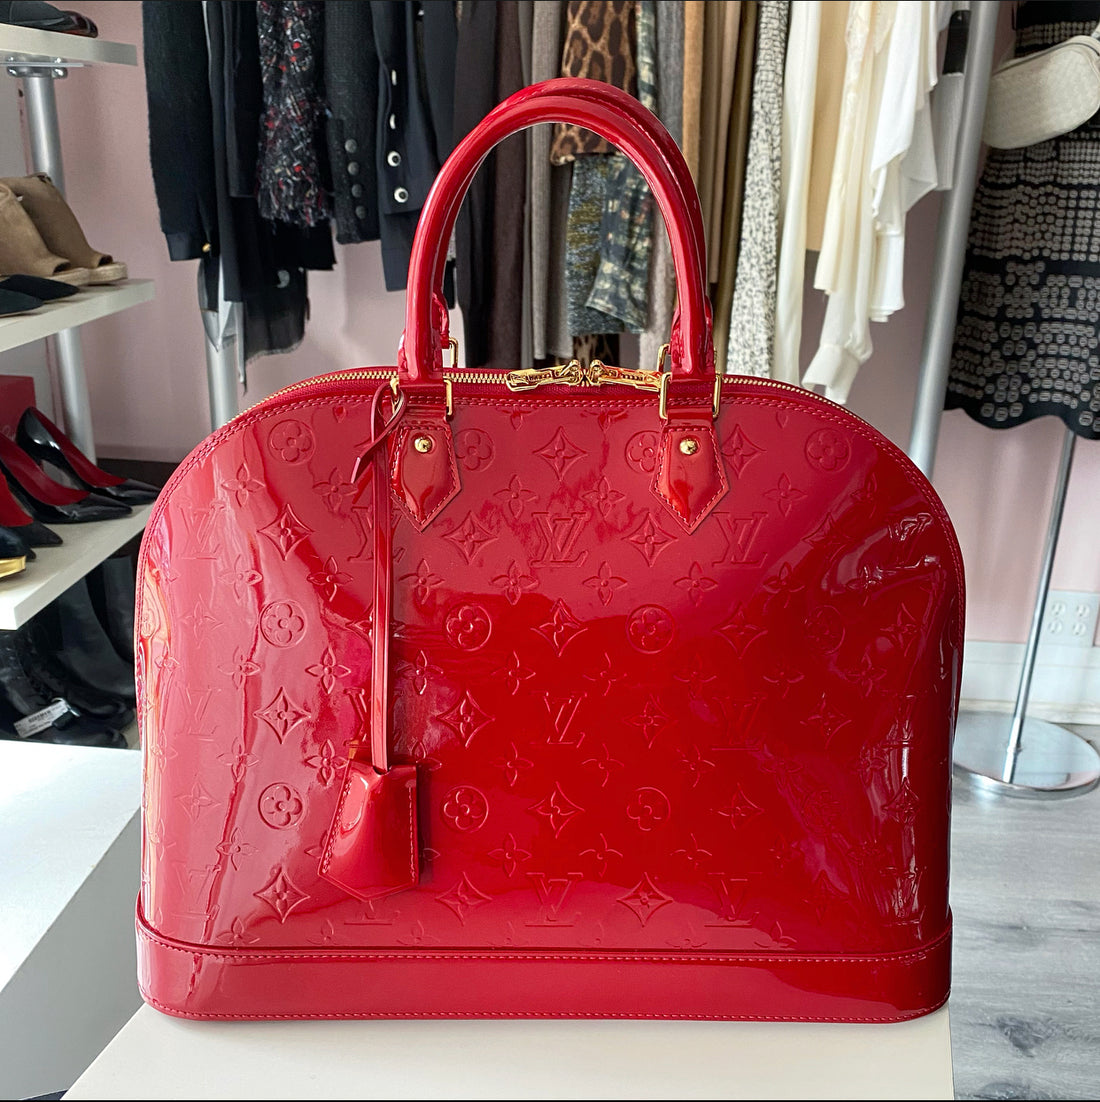 Alma LOUIS VUITTON leather red painted monogram GM bag - VALOIS